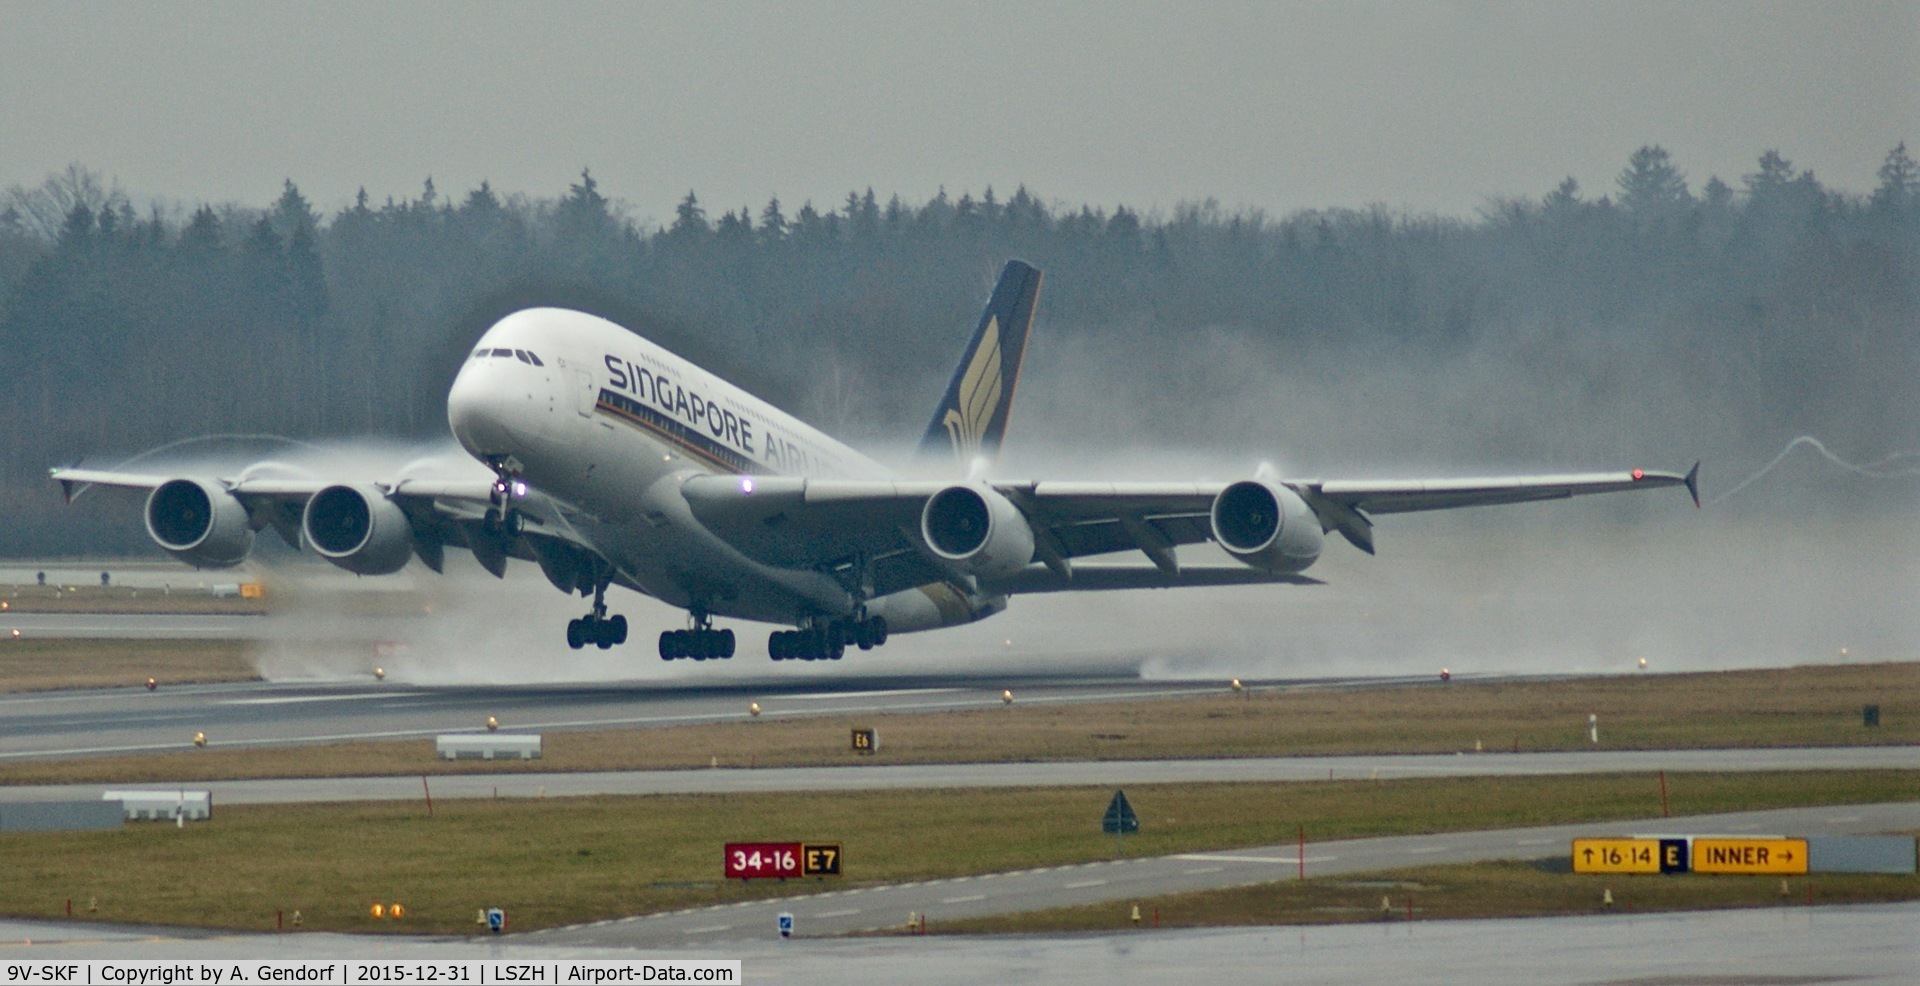 9V-SKF, 2008 Airbus A380-841 C/N 012, Singapore Airlines, is here lifting off RWY 34 at Zürich-Kloten(LSZH)